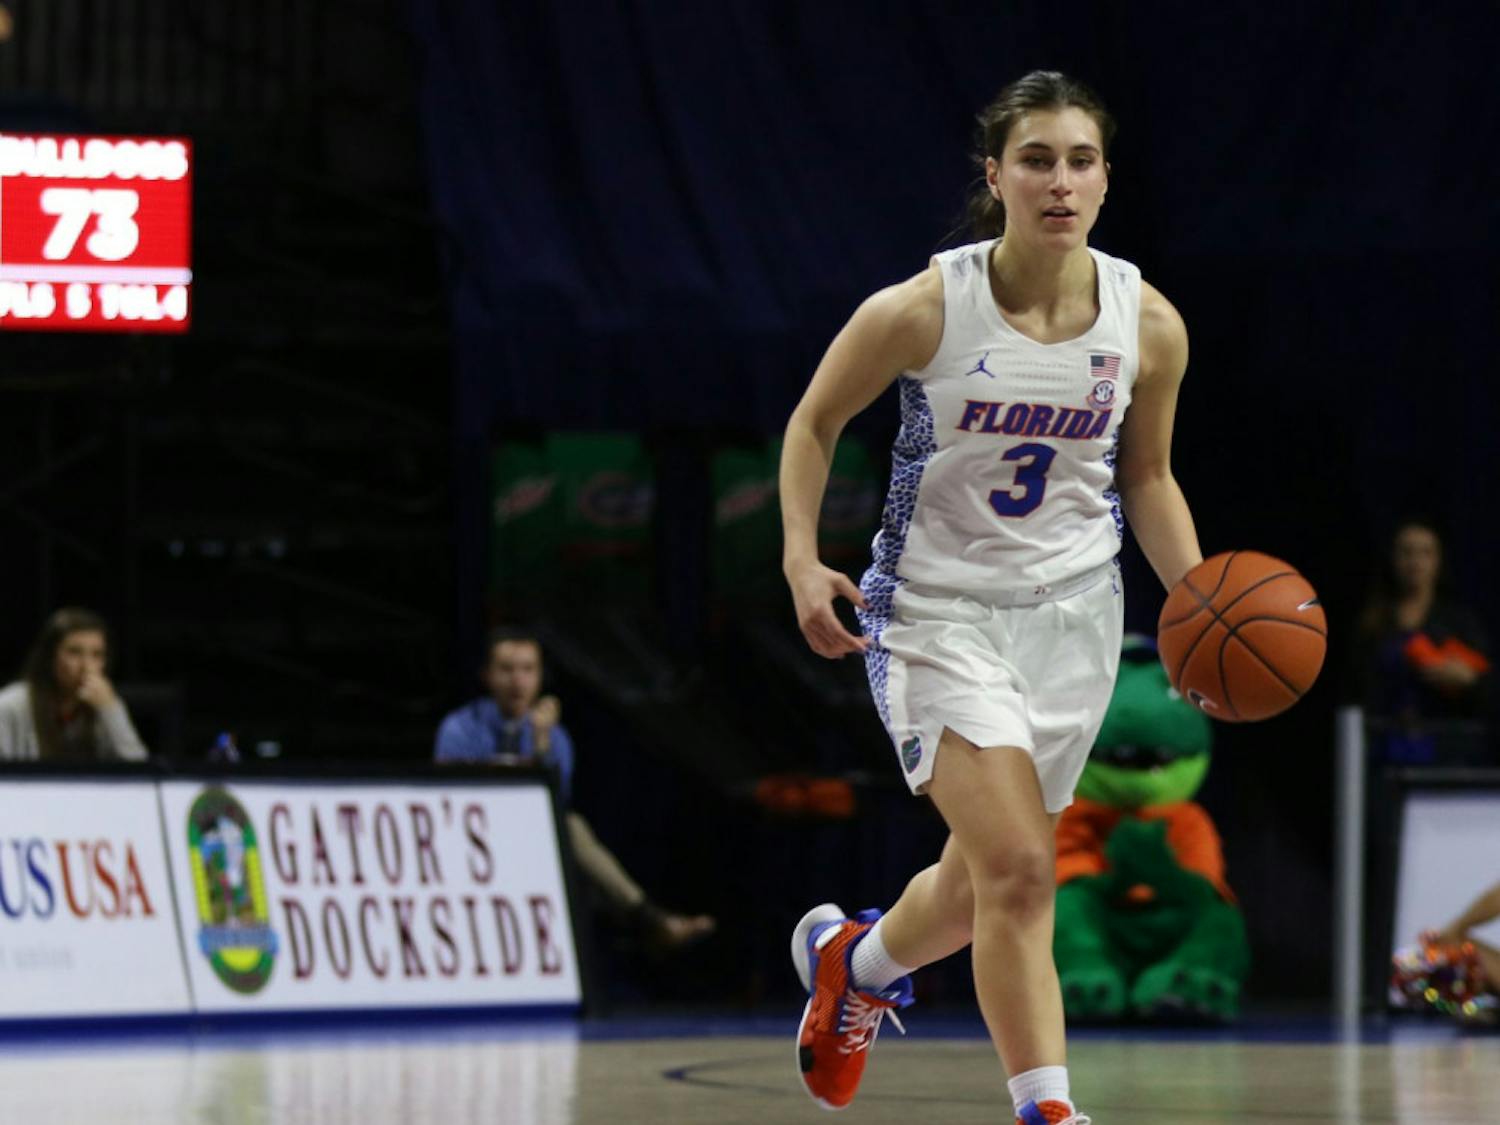 Florida guard Funda Nakkasoglu dropped a team-high 18 points in UF’s 67-50 loss to Tennessee on Thursday in Knoxville.
&nbsp;